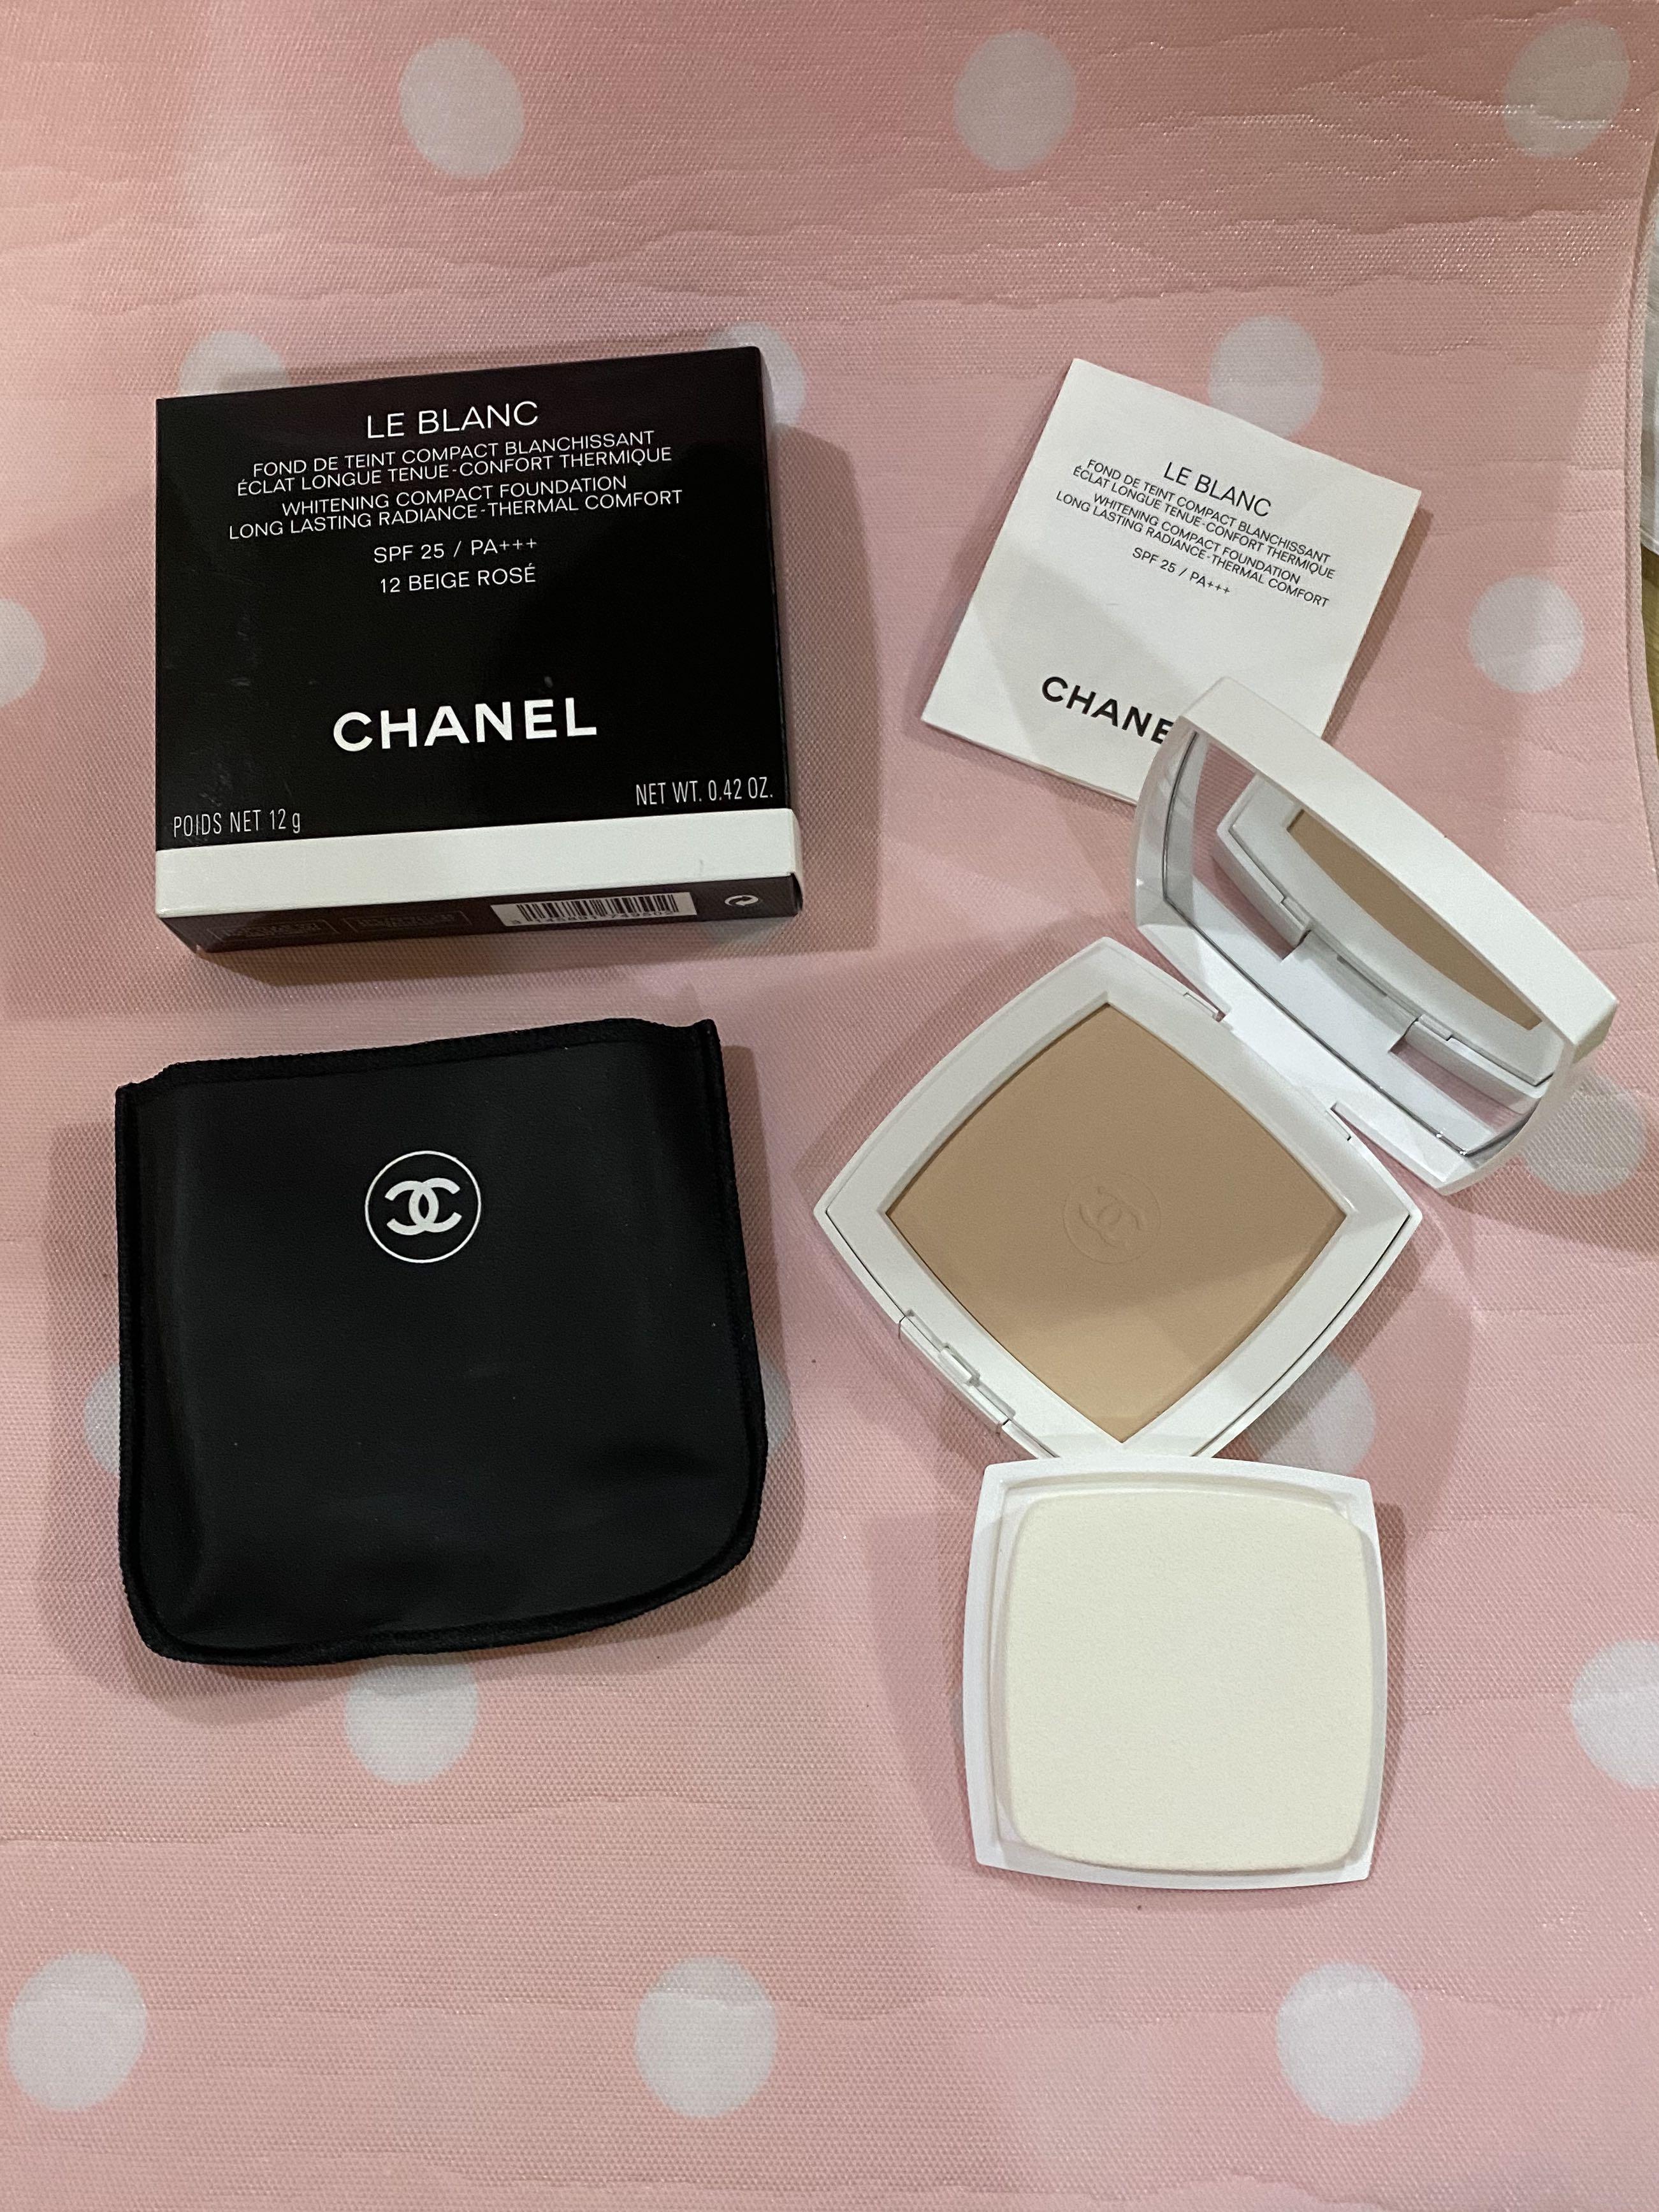 First Impression: Chanel le blanc whitening compact foundation